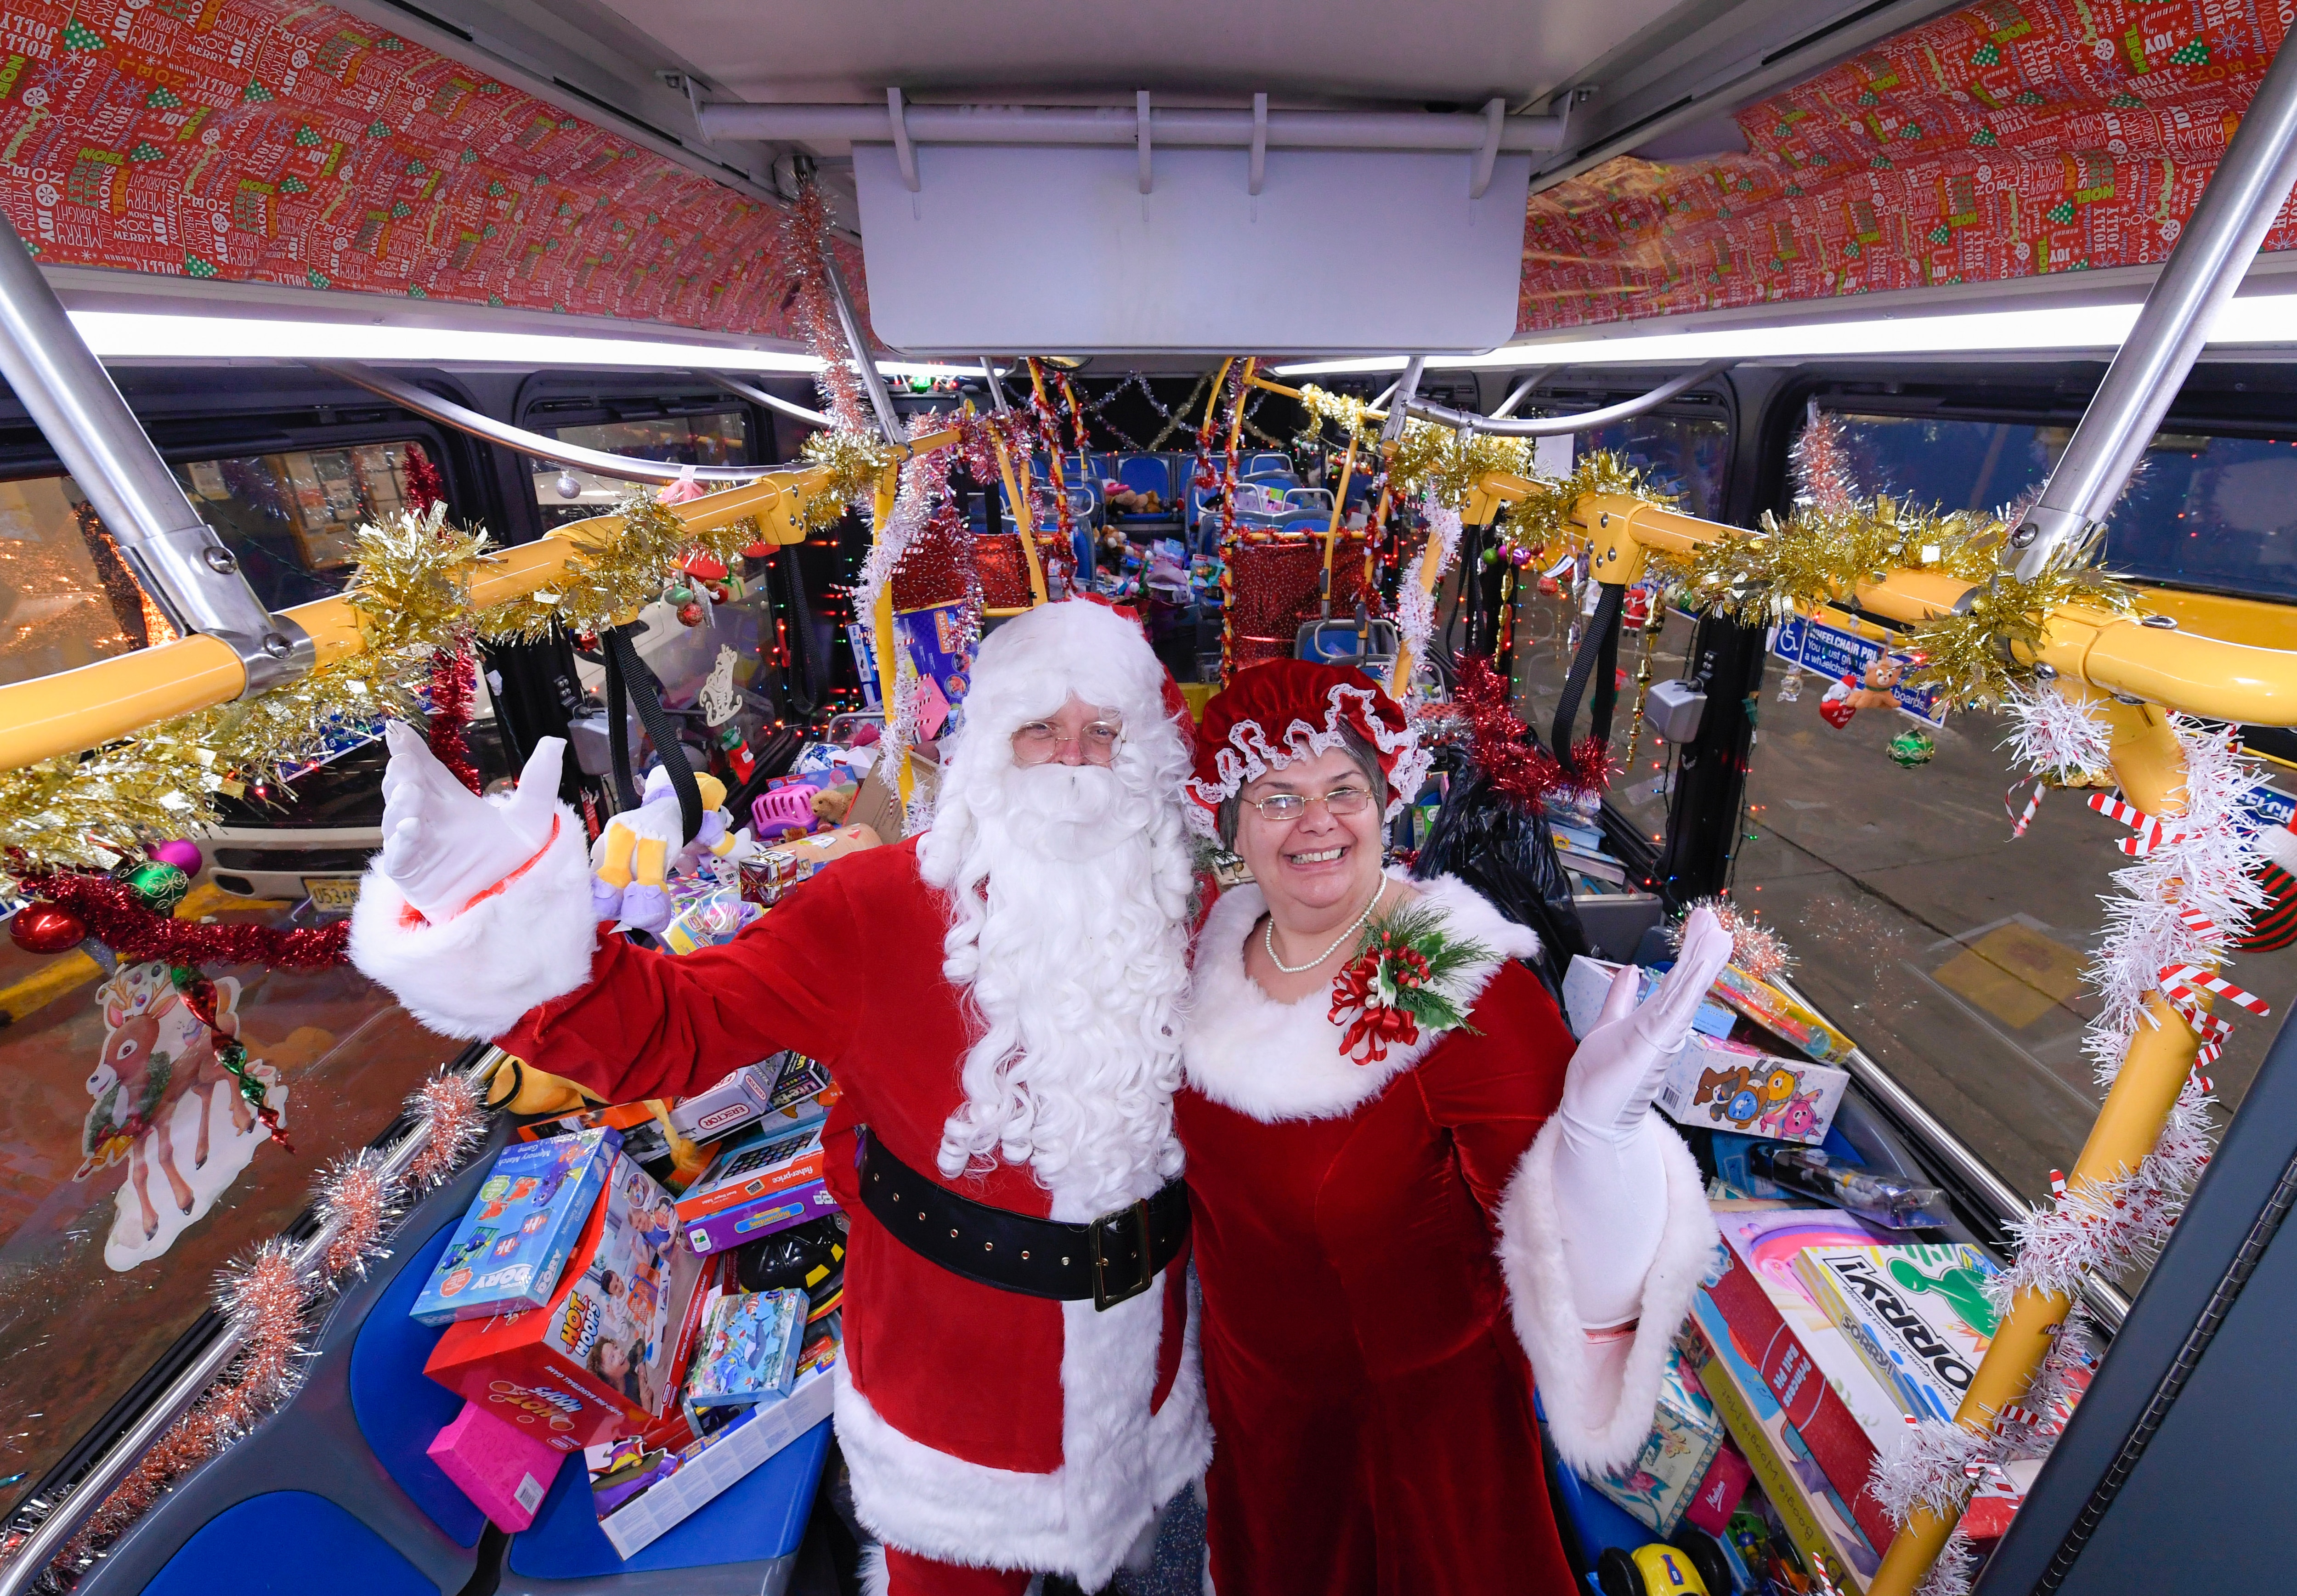 The MTA joined with Kids Against Cancer to collect toys from Staten Island bus depots, which were delivered by Santa and Mrs. Claus aboard a special bus, branded “Santa’s Express” on Fri., December 17, 2021.